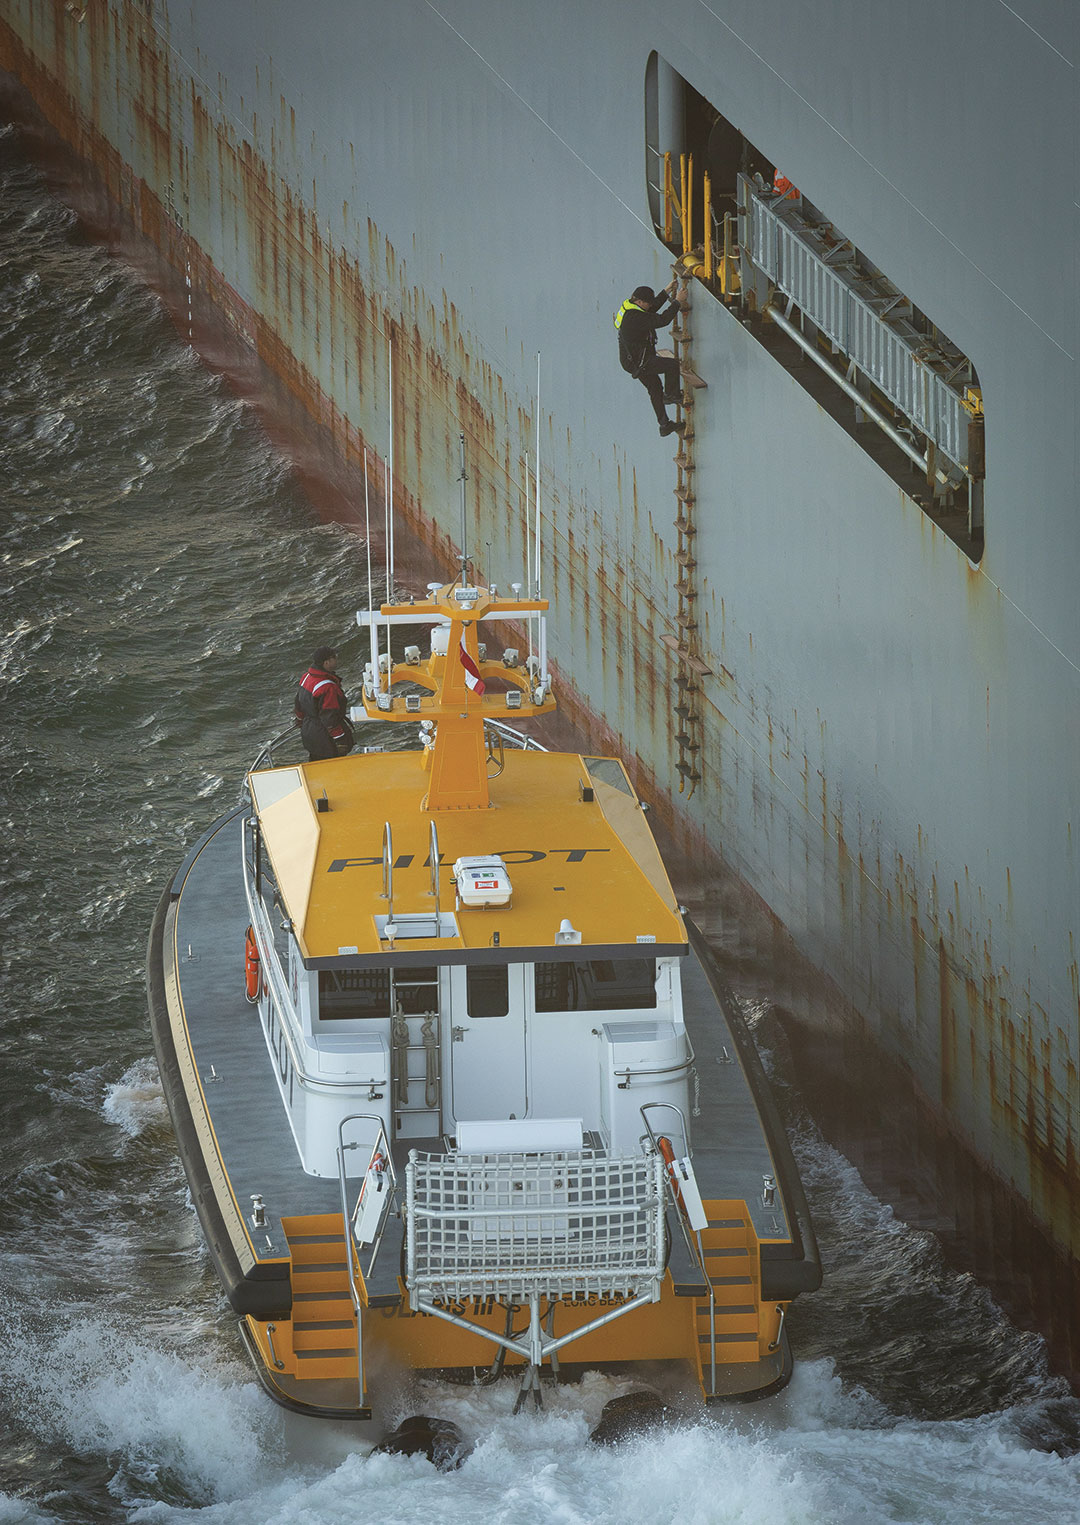 A stern view of Orion showing its Hamilton waterjets and hydraulic safety platform.